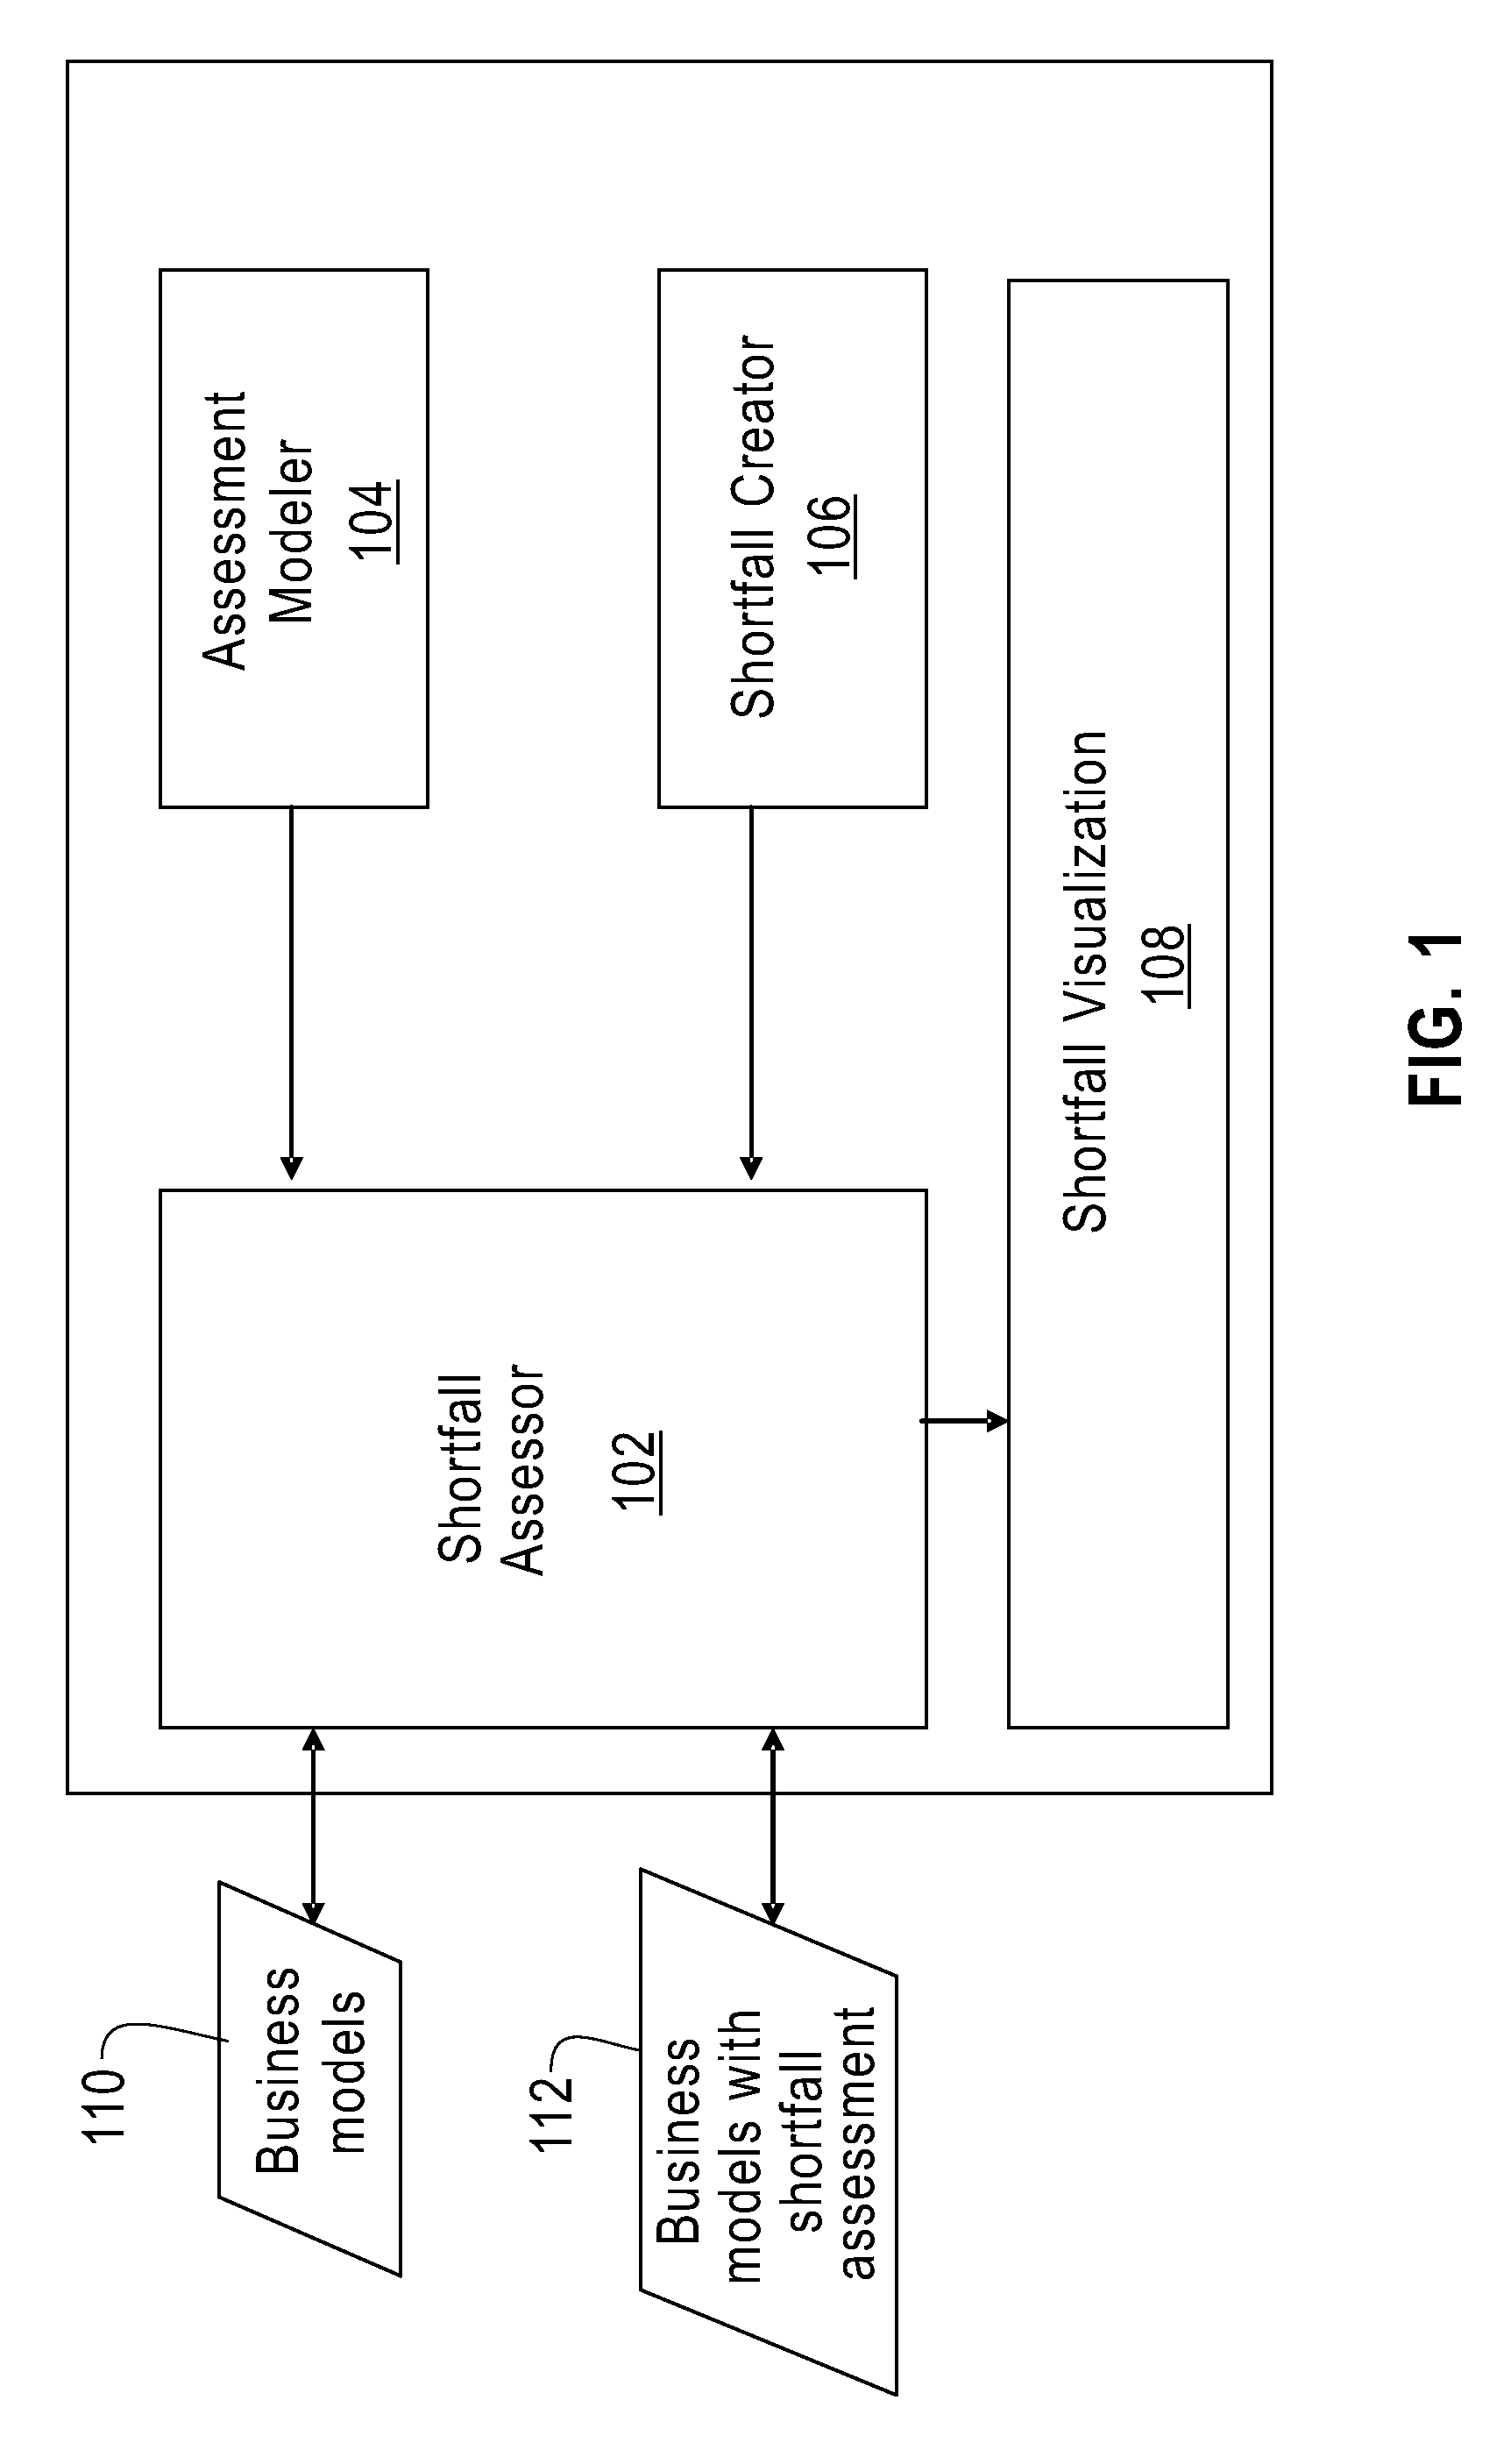 System and method for finding business transformation opportunities by using a multi-dimensional shortfall analysis of an enterprise